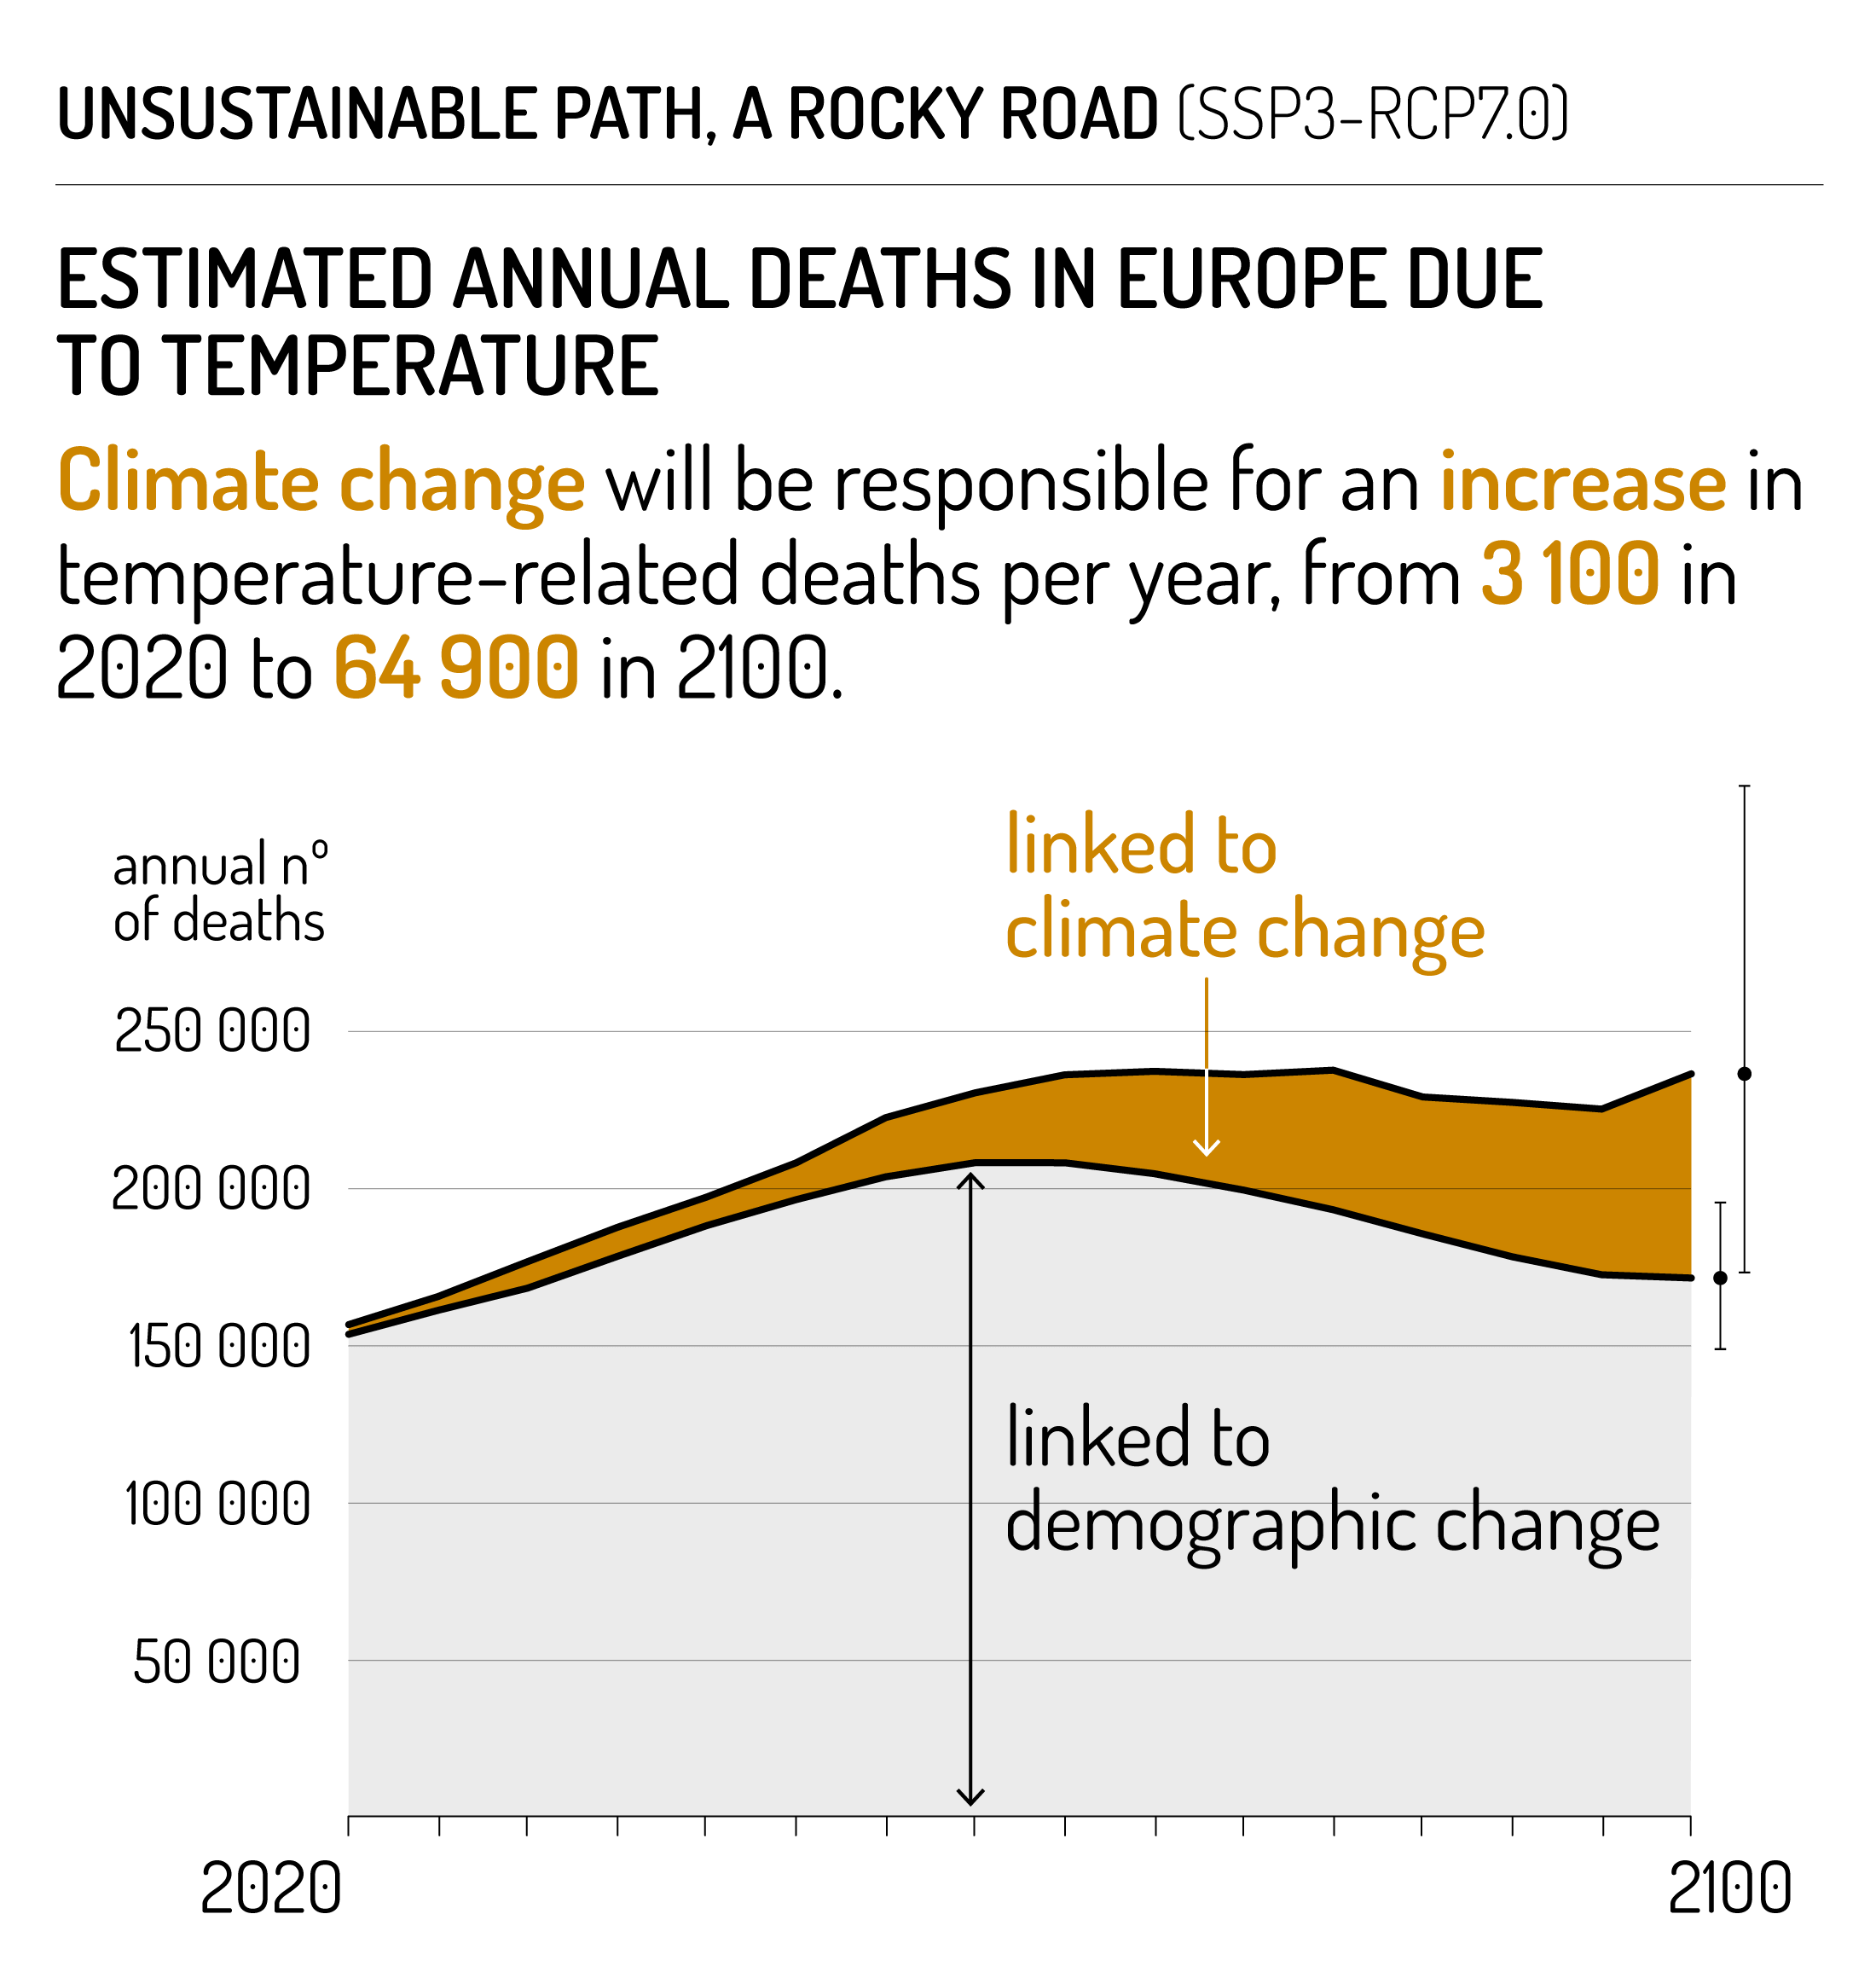 A rocky road increase in temperature-related deaths